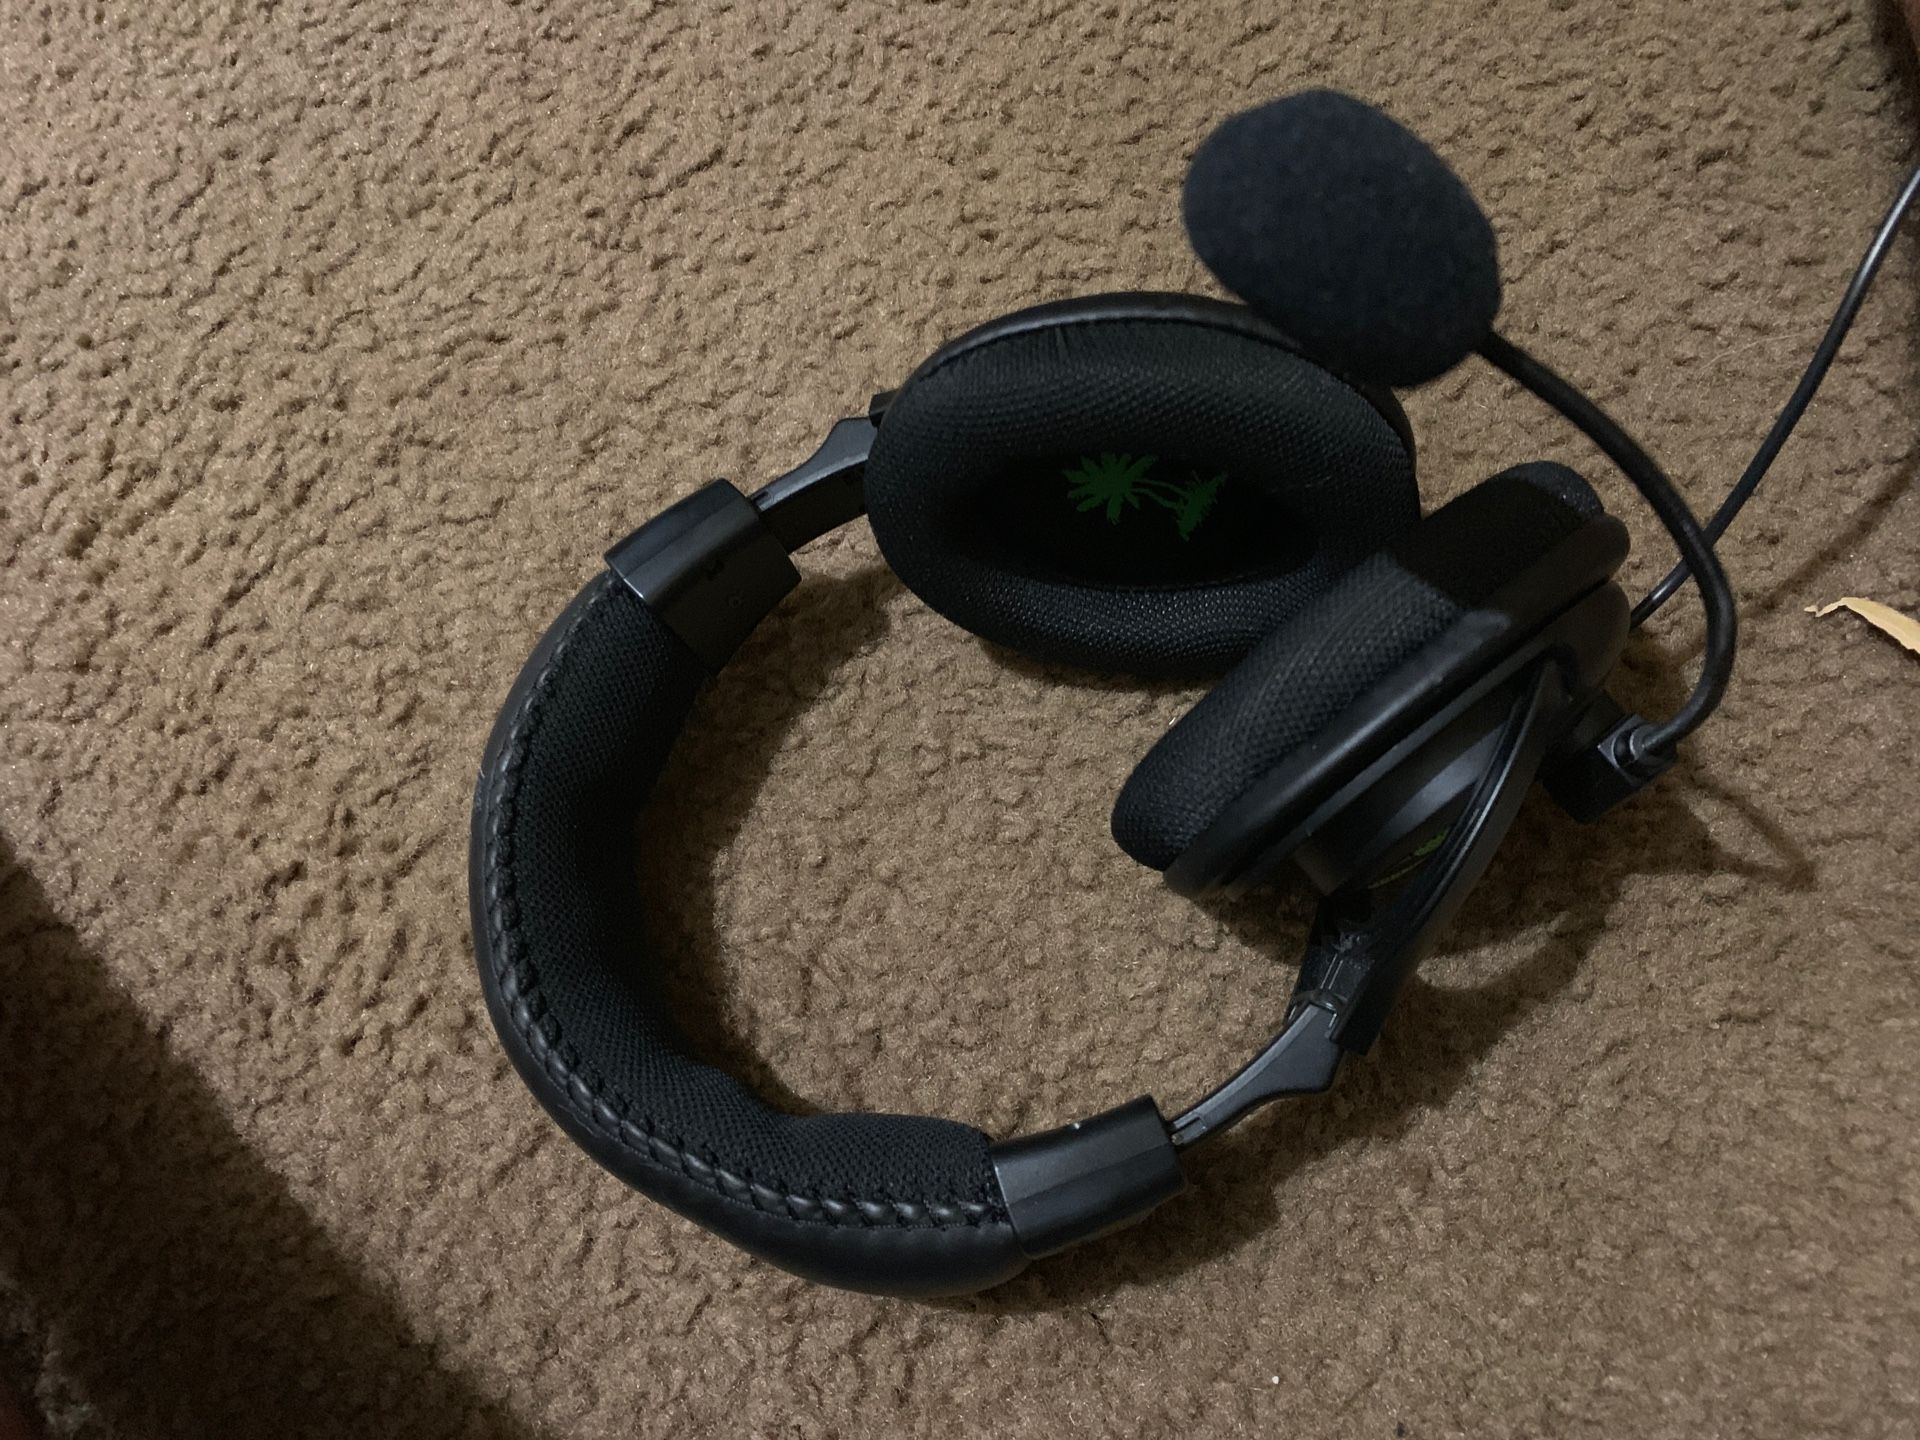 Headset turtle beach send me a message for a price $